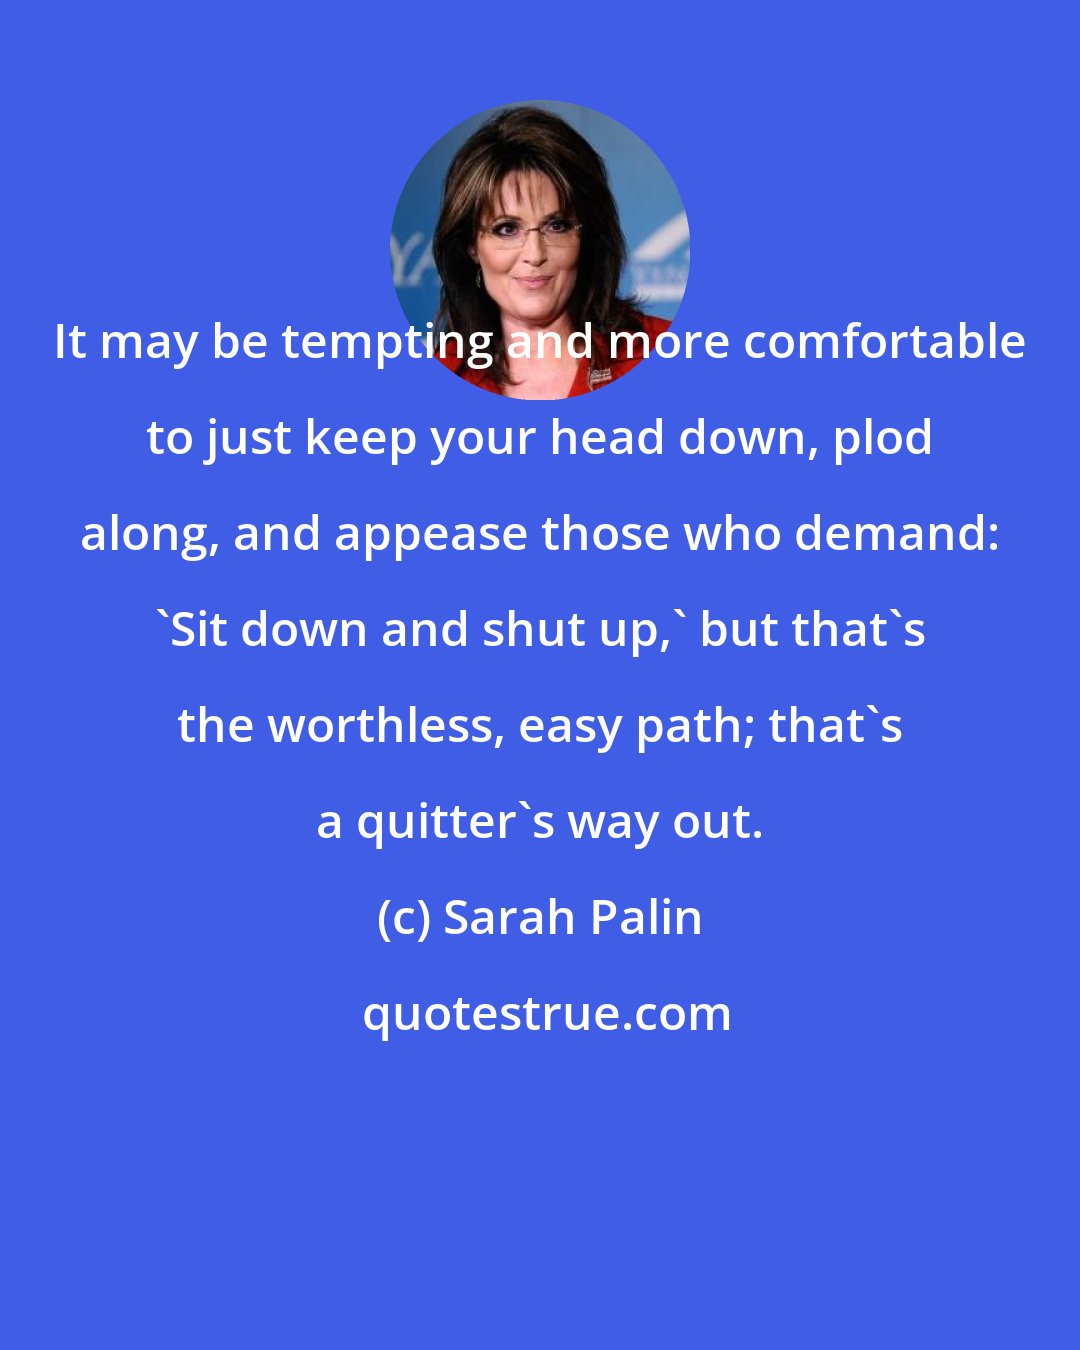 Sarah Palin: It may be tempting and more comfortable to just keep your head down, plod along, and appease those who demand: 'Sit down and shut up,' but that's the worthless, easy path; that's a quitter's way out.